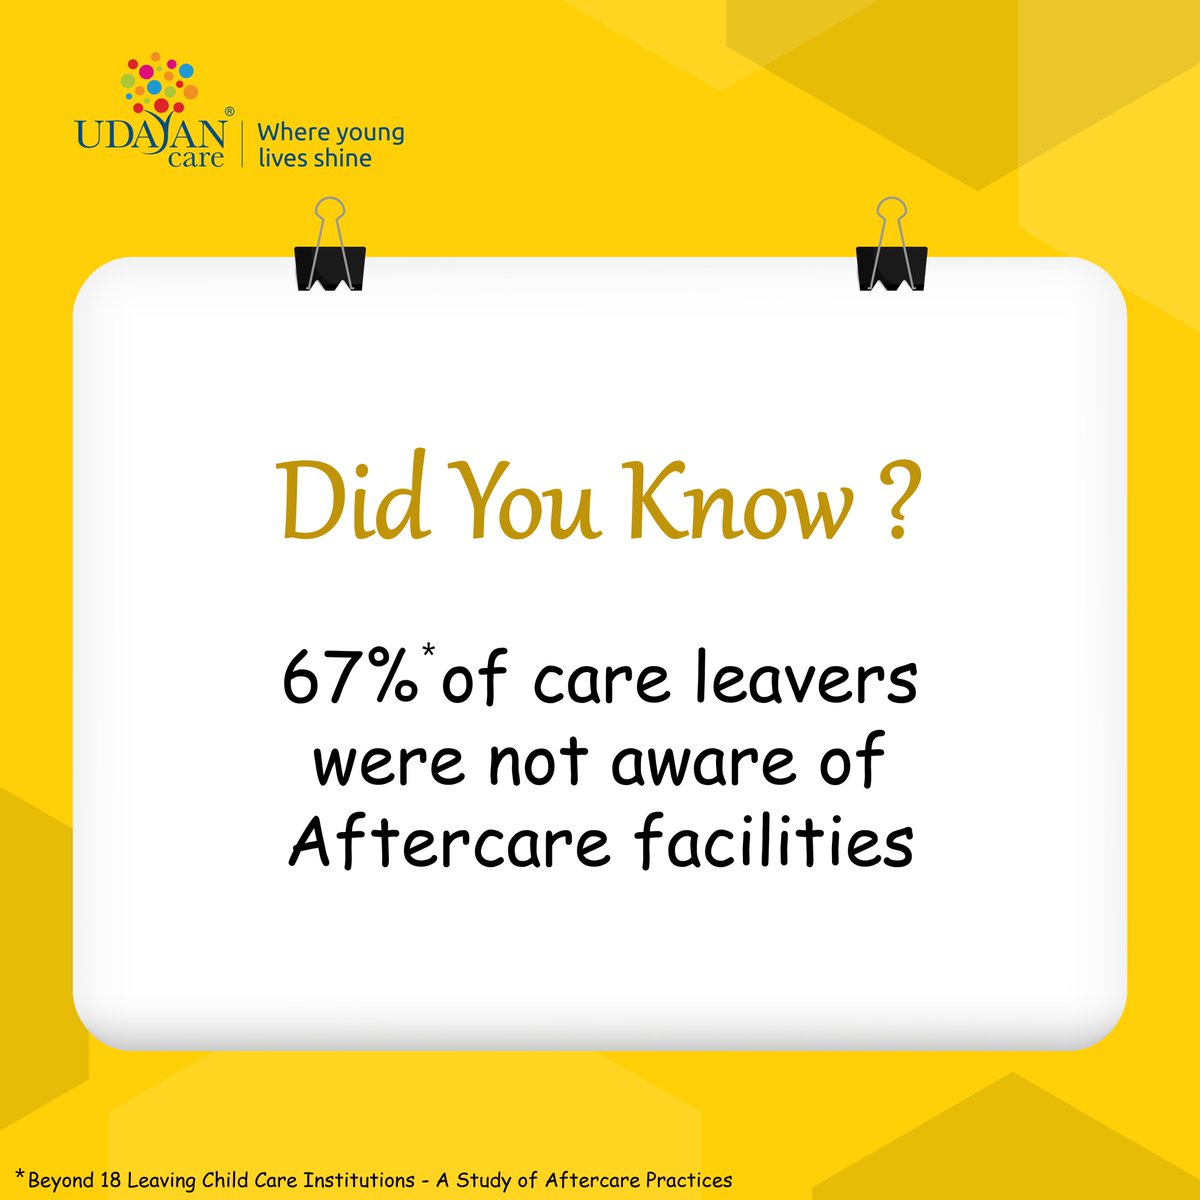 Aftercare support, and a significant majority (67%) were unaware of available services and welfare schemes. To know more read the report:
#CareLeavers #MissionVatsalaya #SupportingCareLeavers #UdayanCare